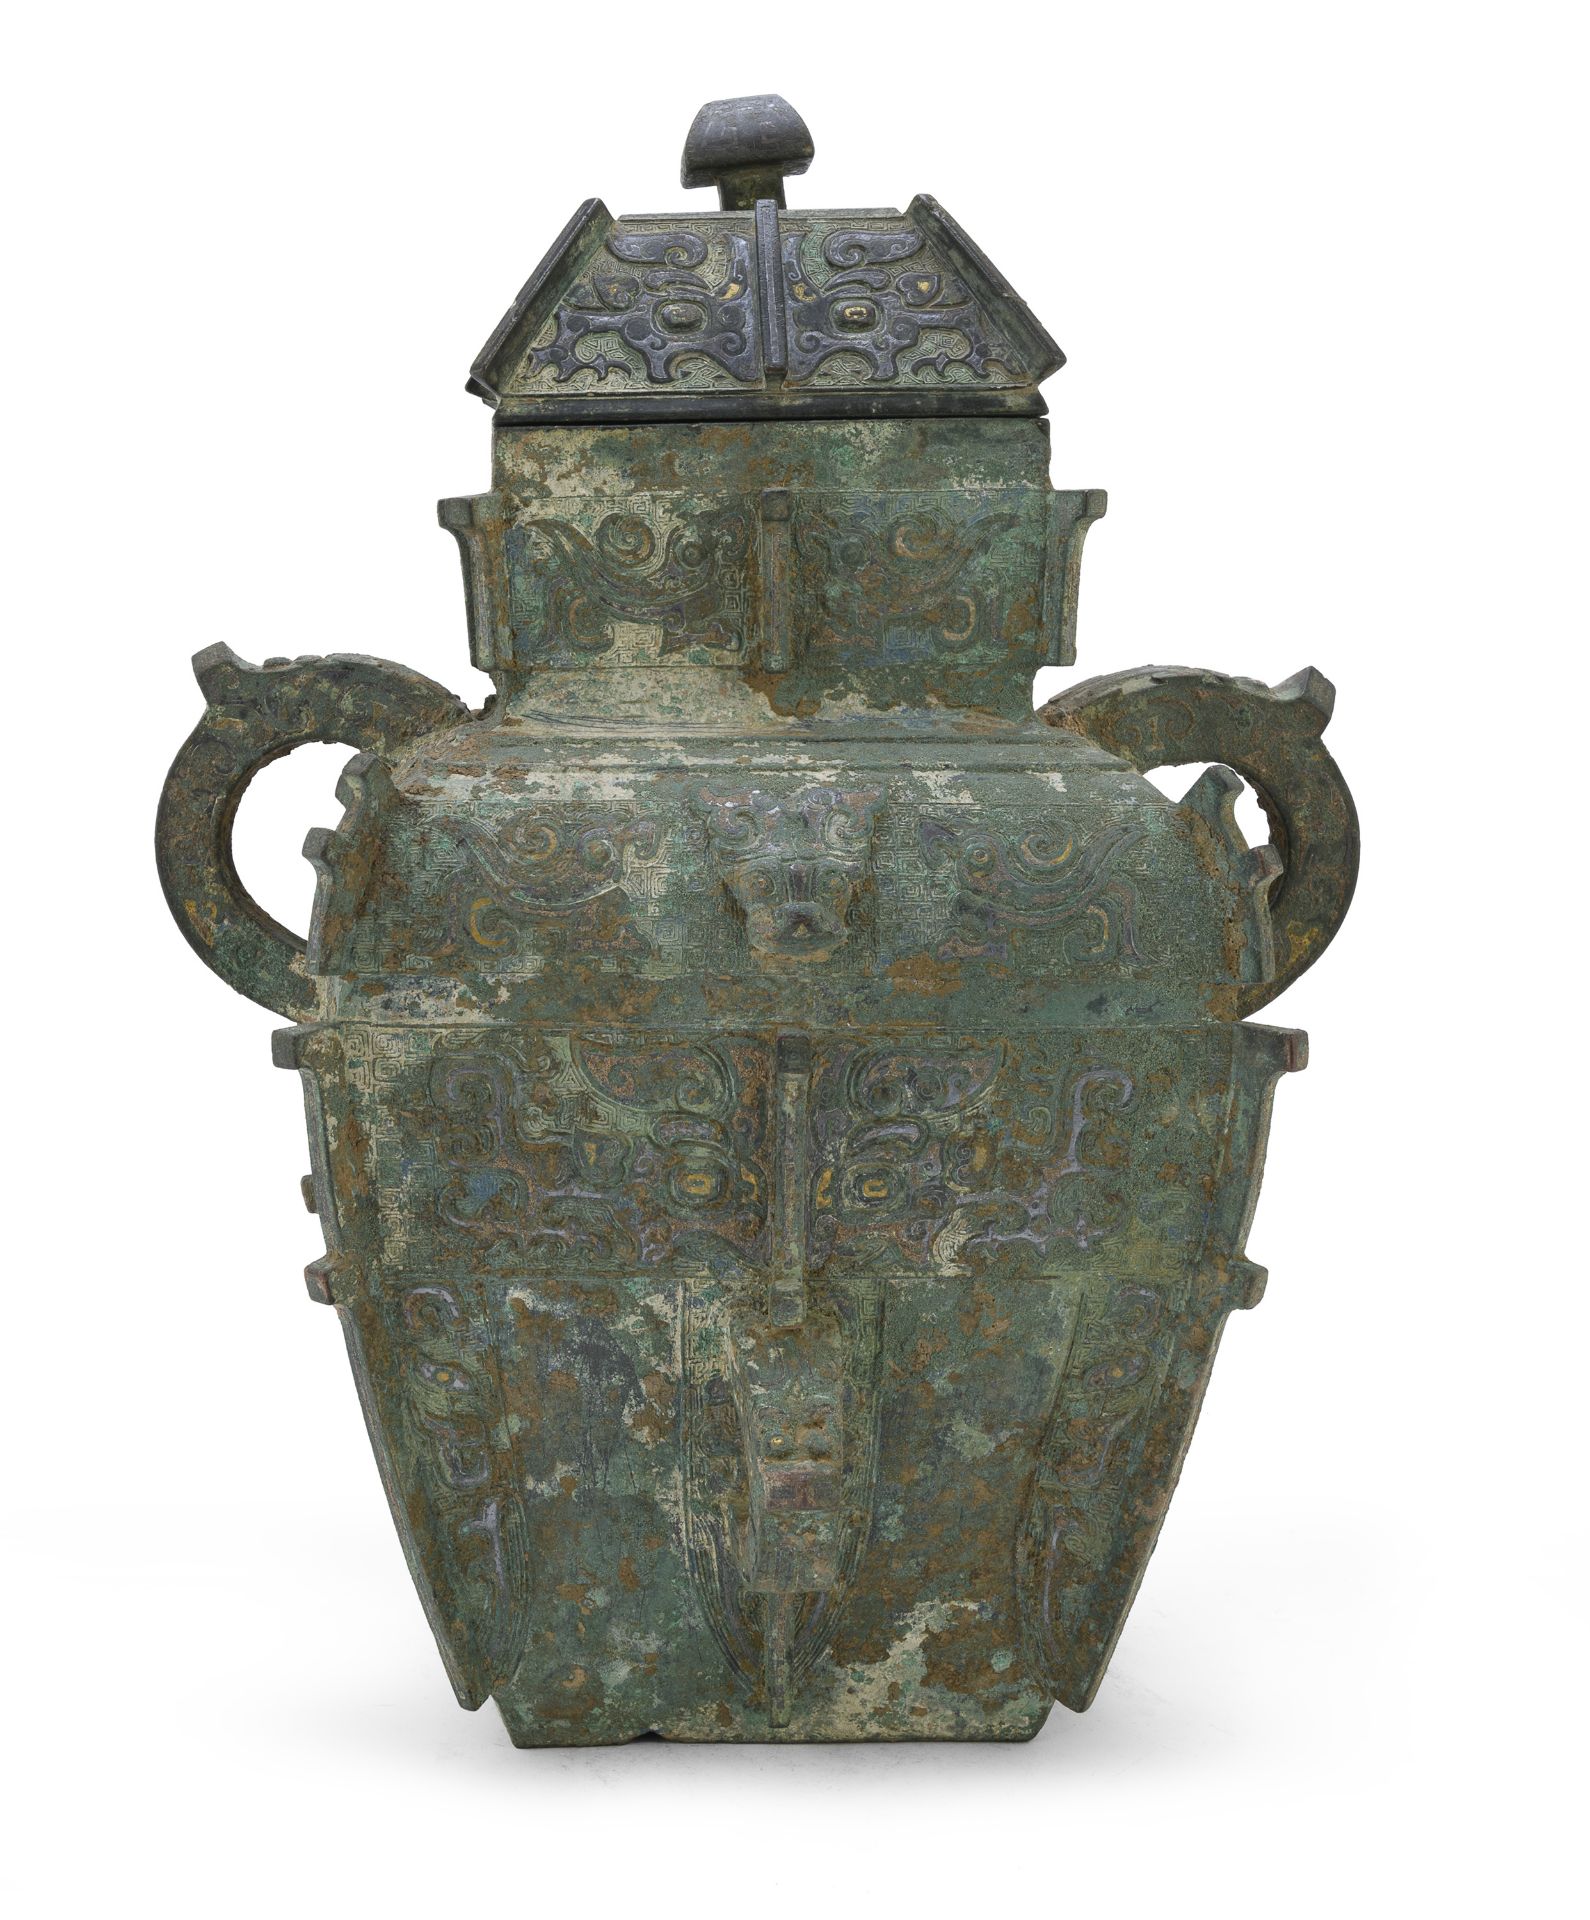 A VERY RARE AND IMPORTANT BRONZE RITUAL WINE VESSEL CHINA 13TH-14TH CENTURY - Image 3 of 7